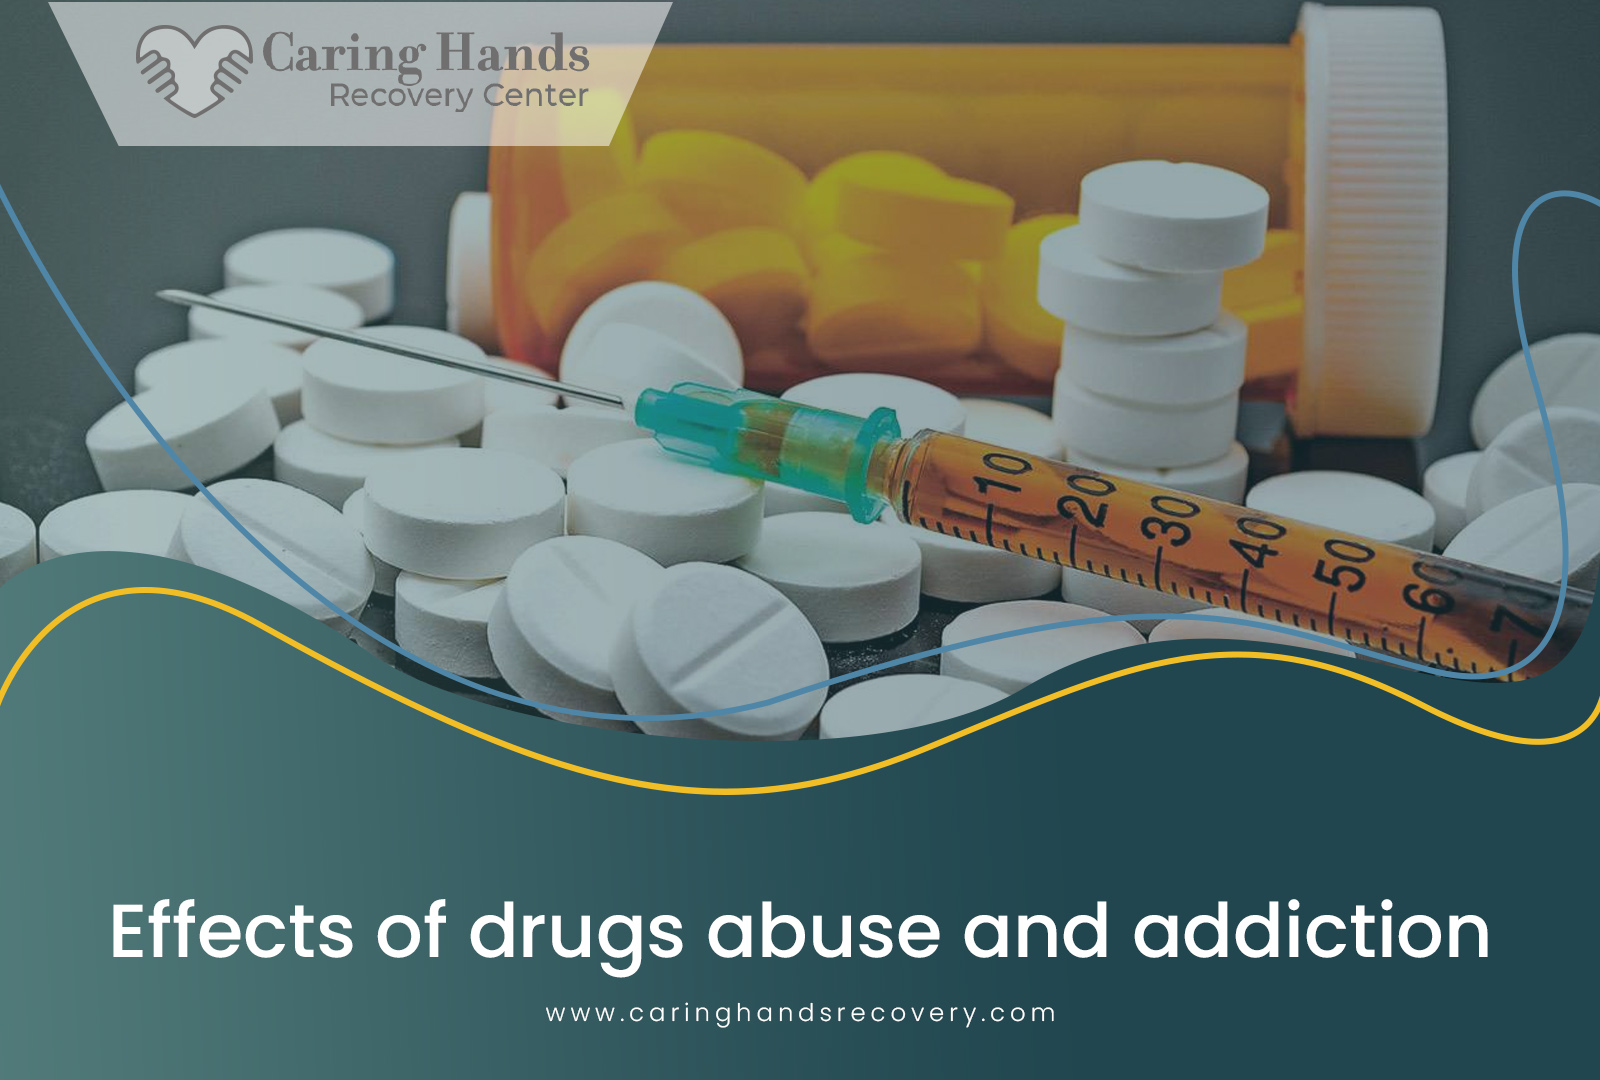 Effects of drug abuse and addiction